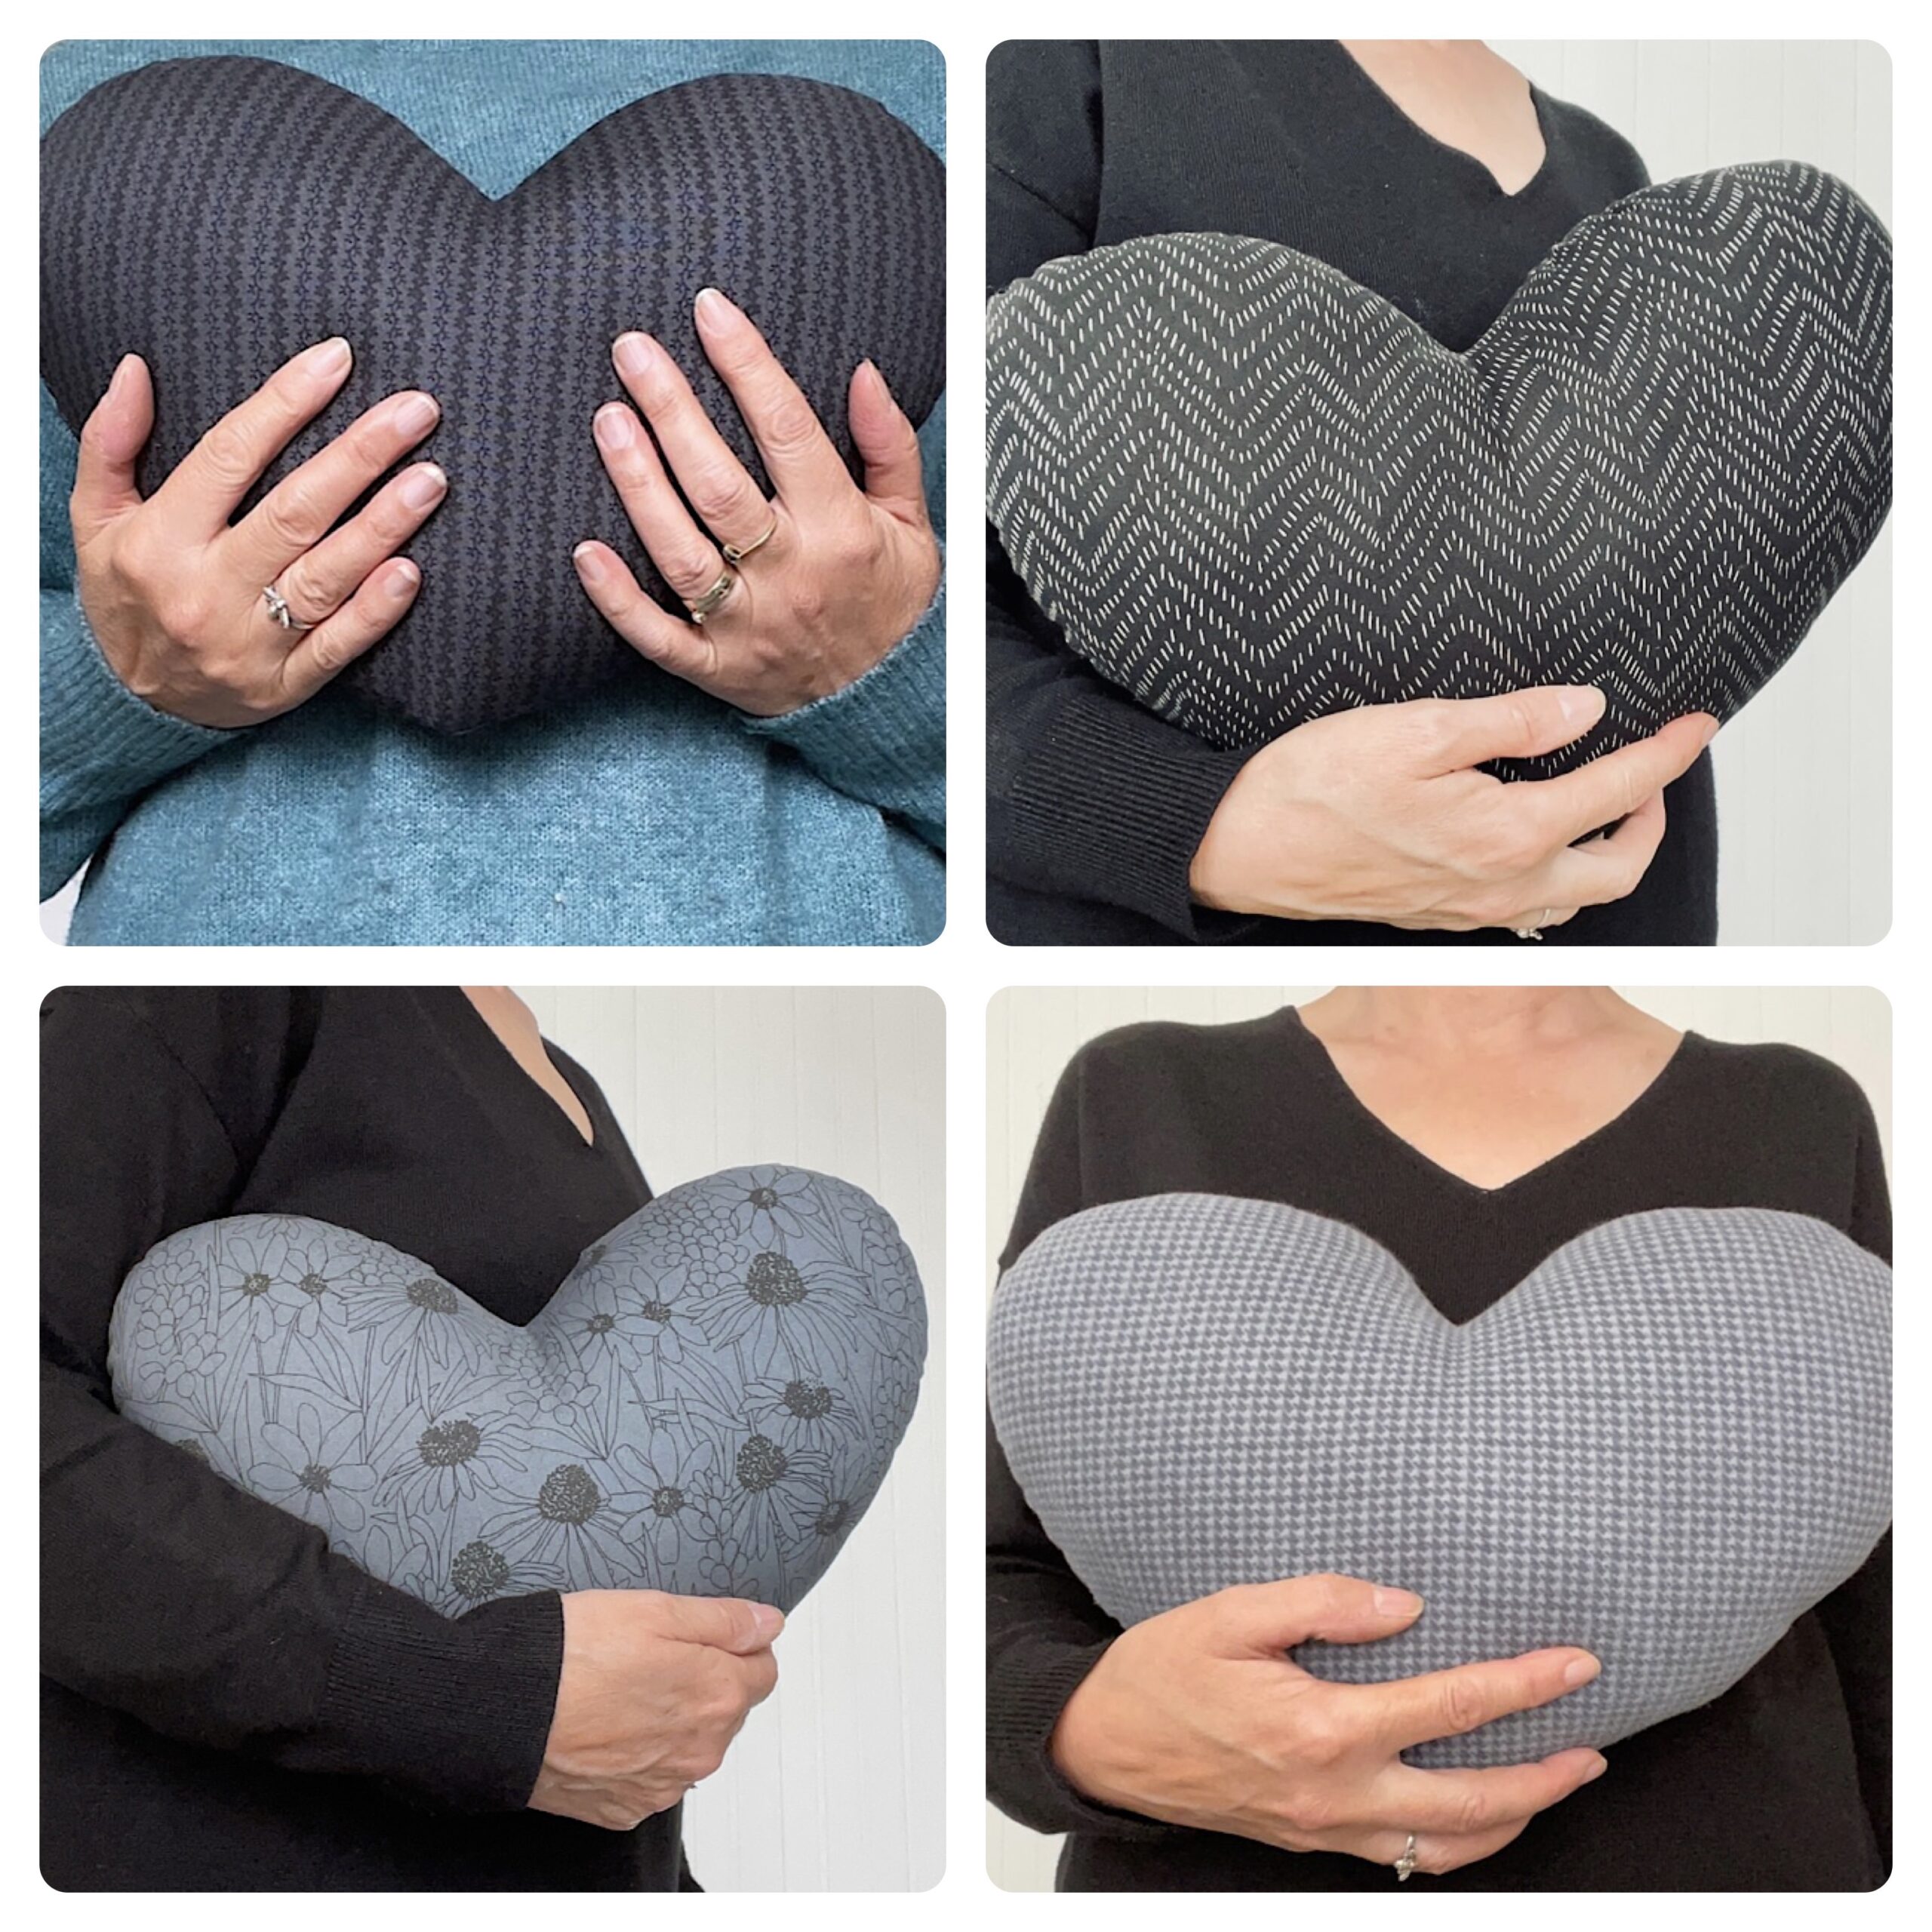 You will find cushions in darker colours such as black, grey, navy blue, brown… with the guarantee that they will be made with care and attention to give you or your loved one the comfort they need during their recovery.